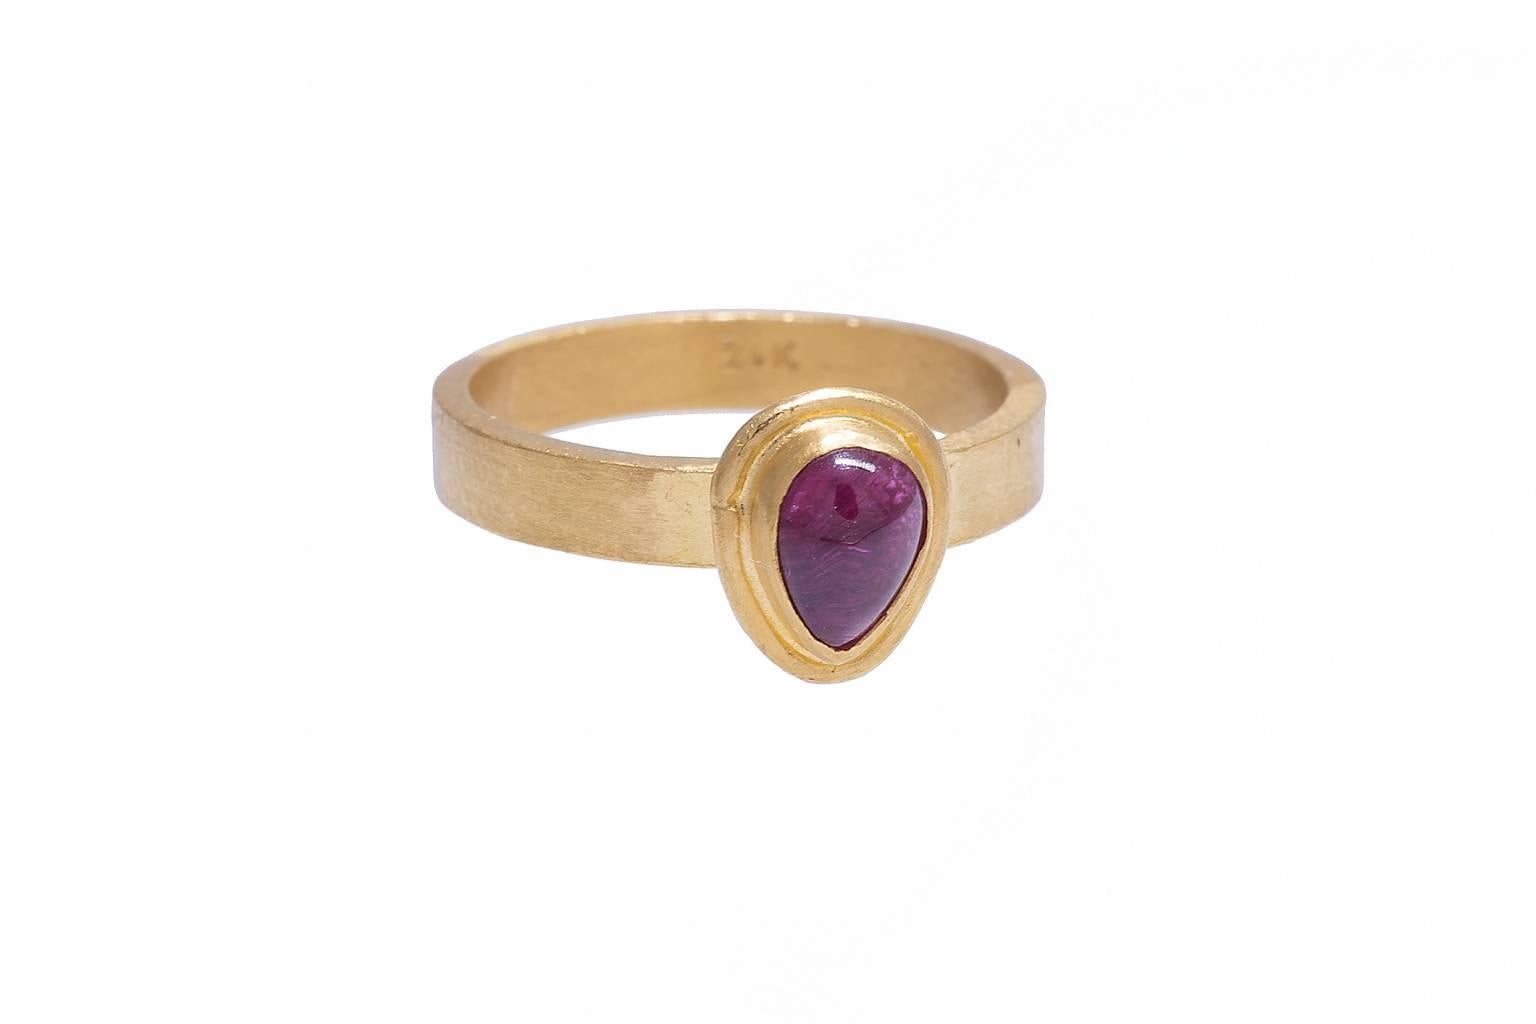 24K yellow gold Yossi Harari ring with bezel set pear shape pink tourmaline cabochon.
Pink Tourmaline is 6mm x 4.5mm. The shank is flat and 3.3 mm wide.
Size 7. Can be sized.